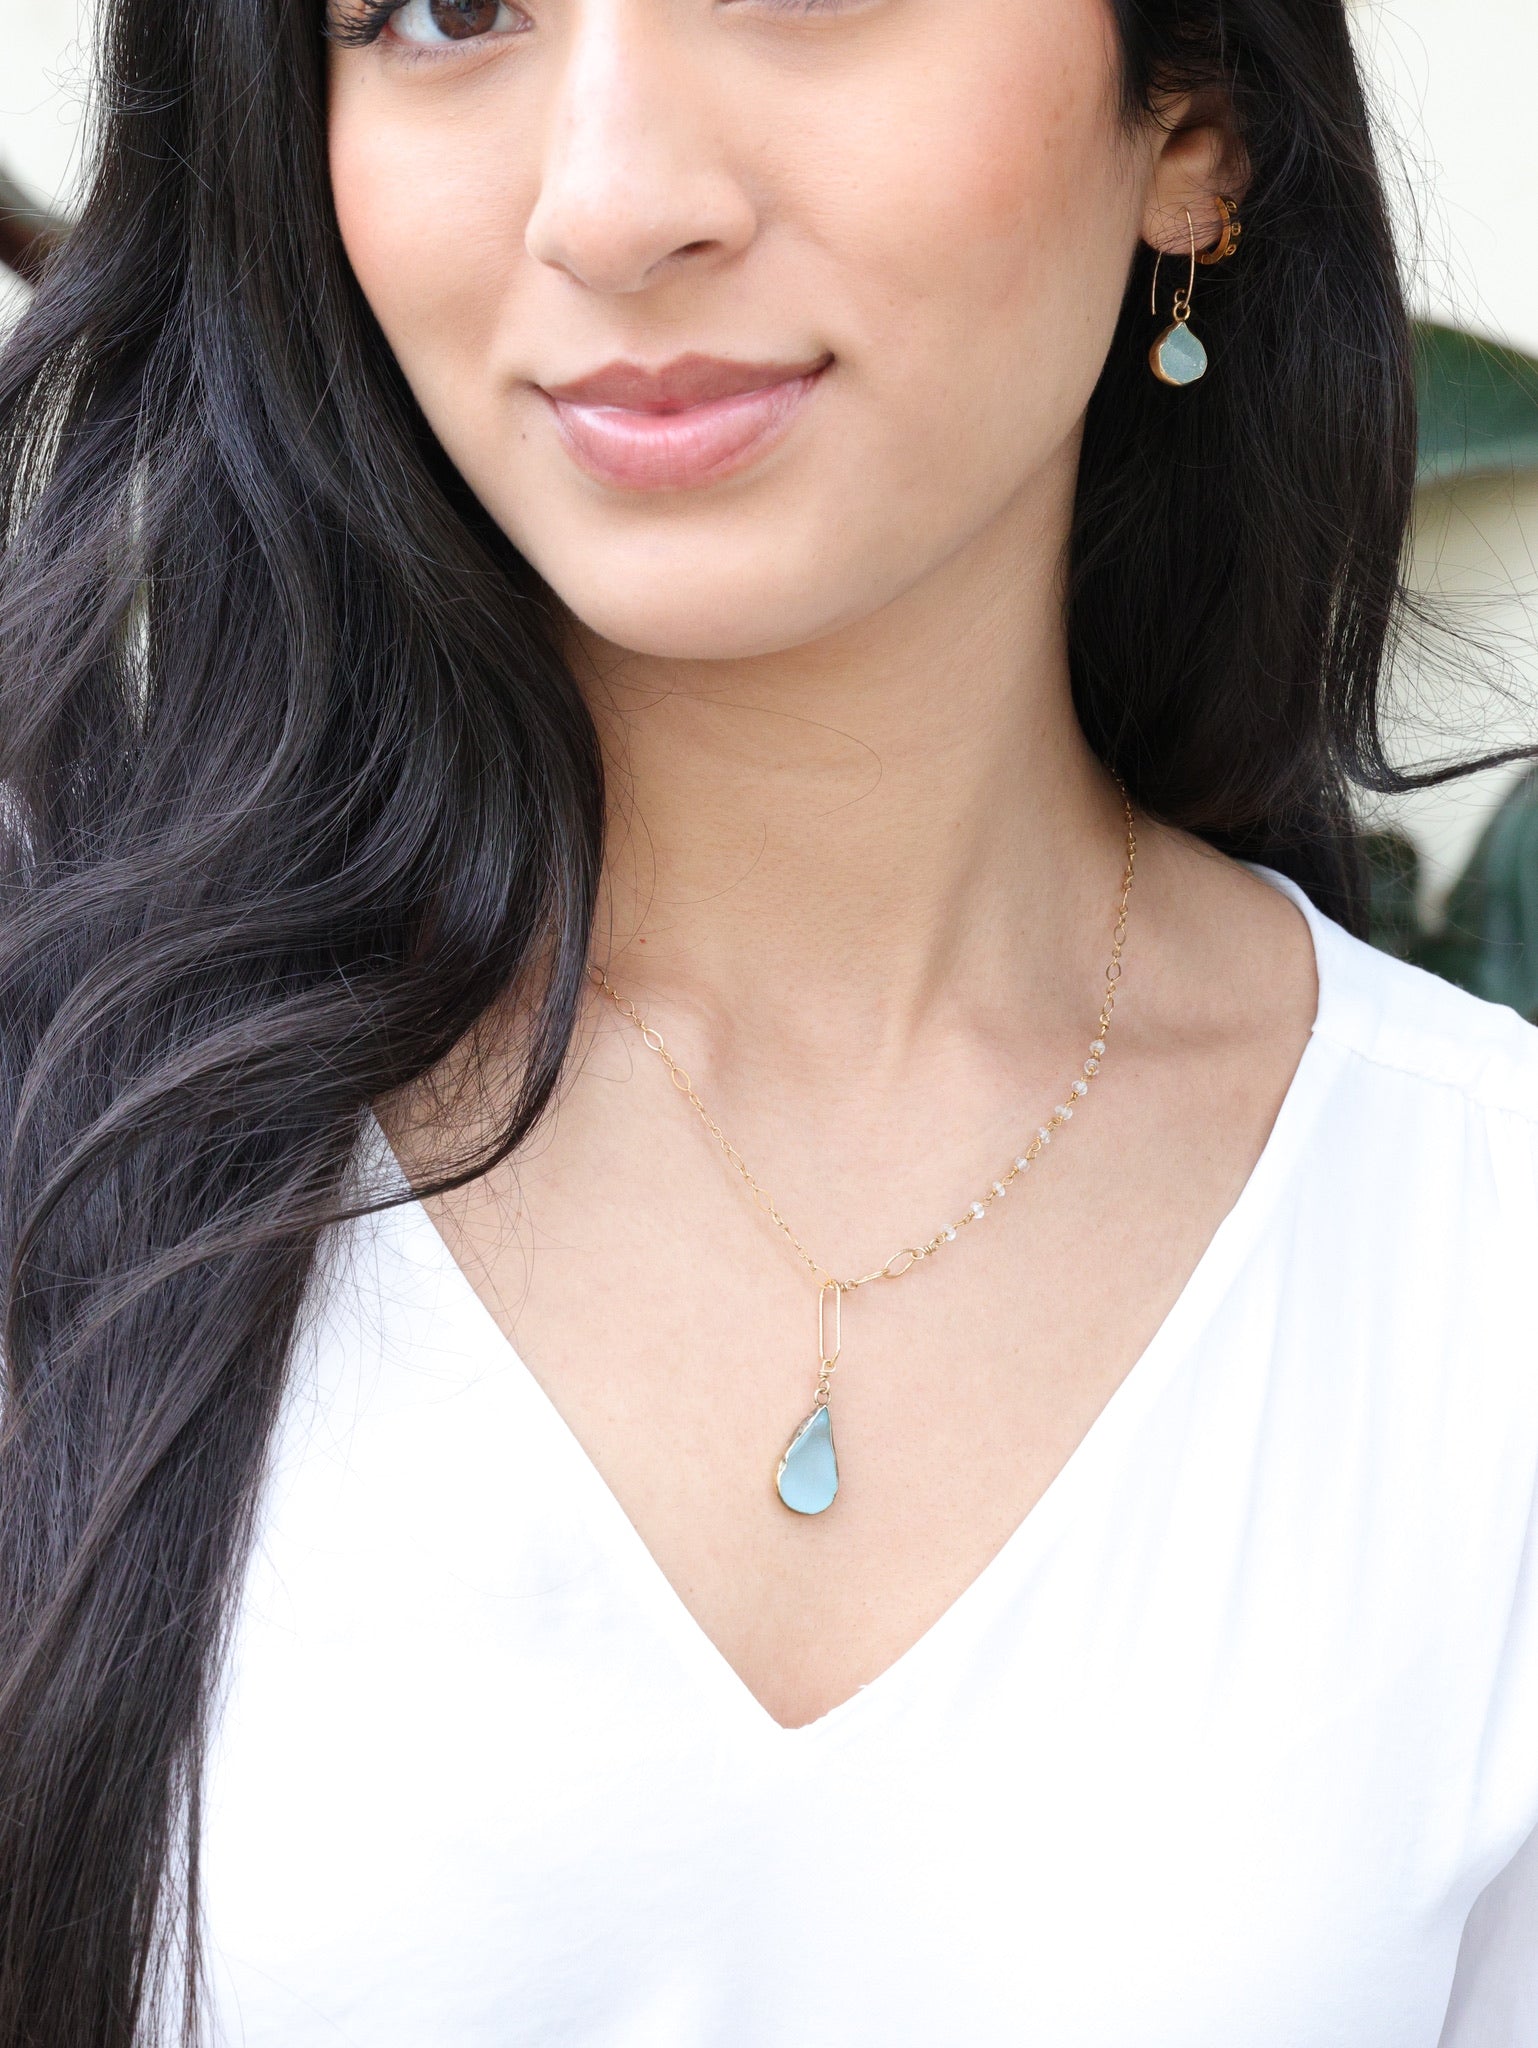 teardrop druzy necklace paired with earrings form the nh Aqua gold collection on model 